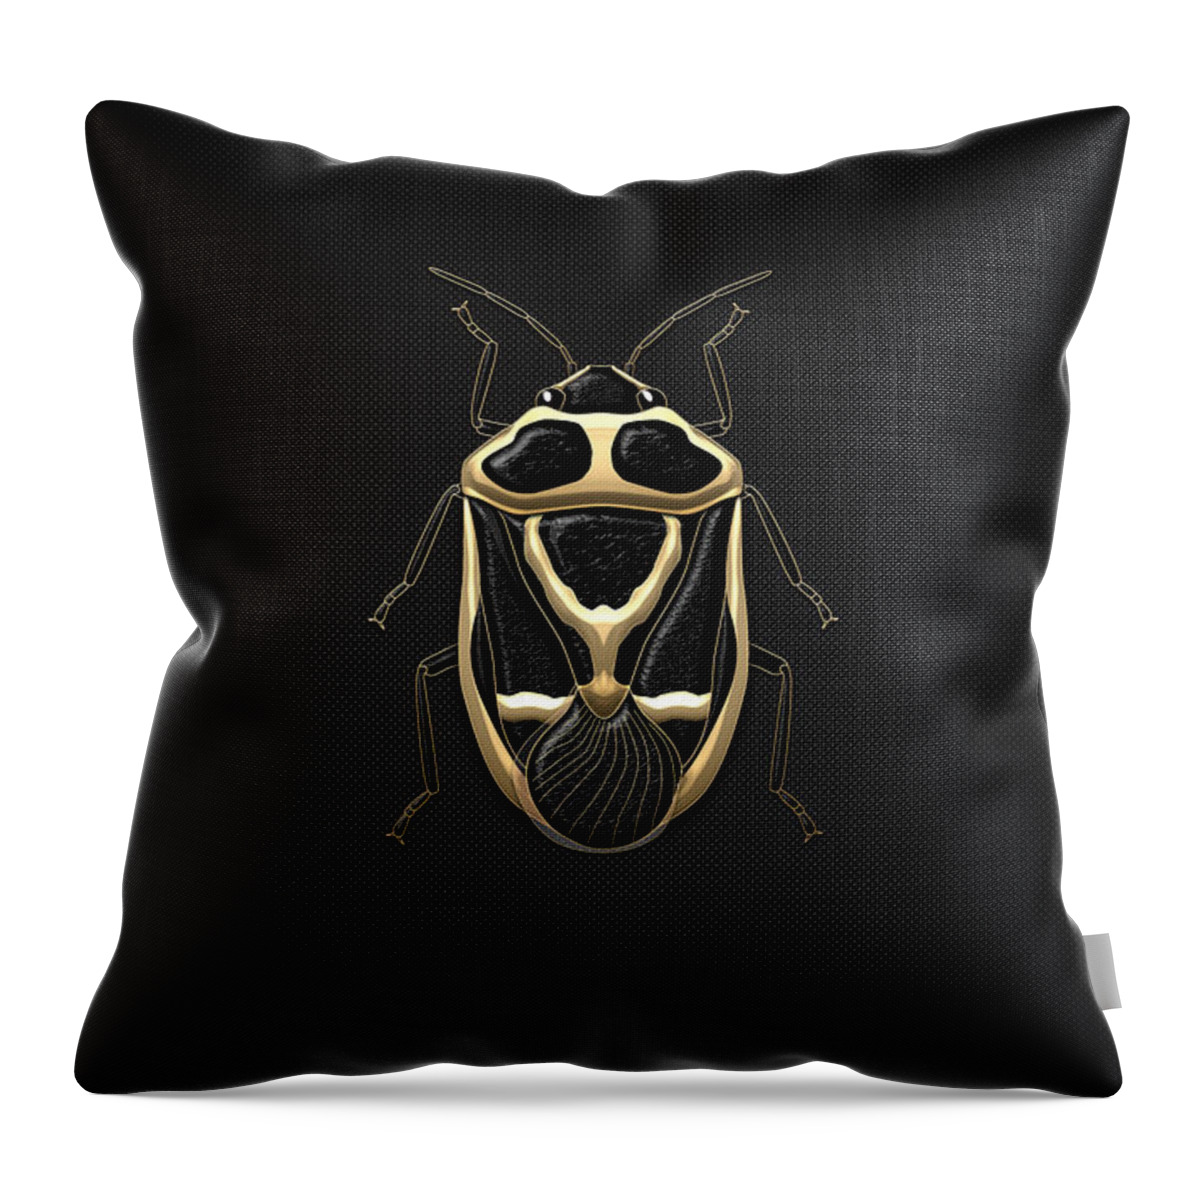 Beasts Creatures And Critters Collection By Serge Averbukh Throw Pillow featuring the digital art Black Shieldbug with Gold Accents on Black Canvas by Serge Averbukh